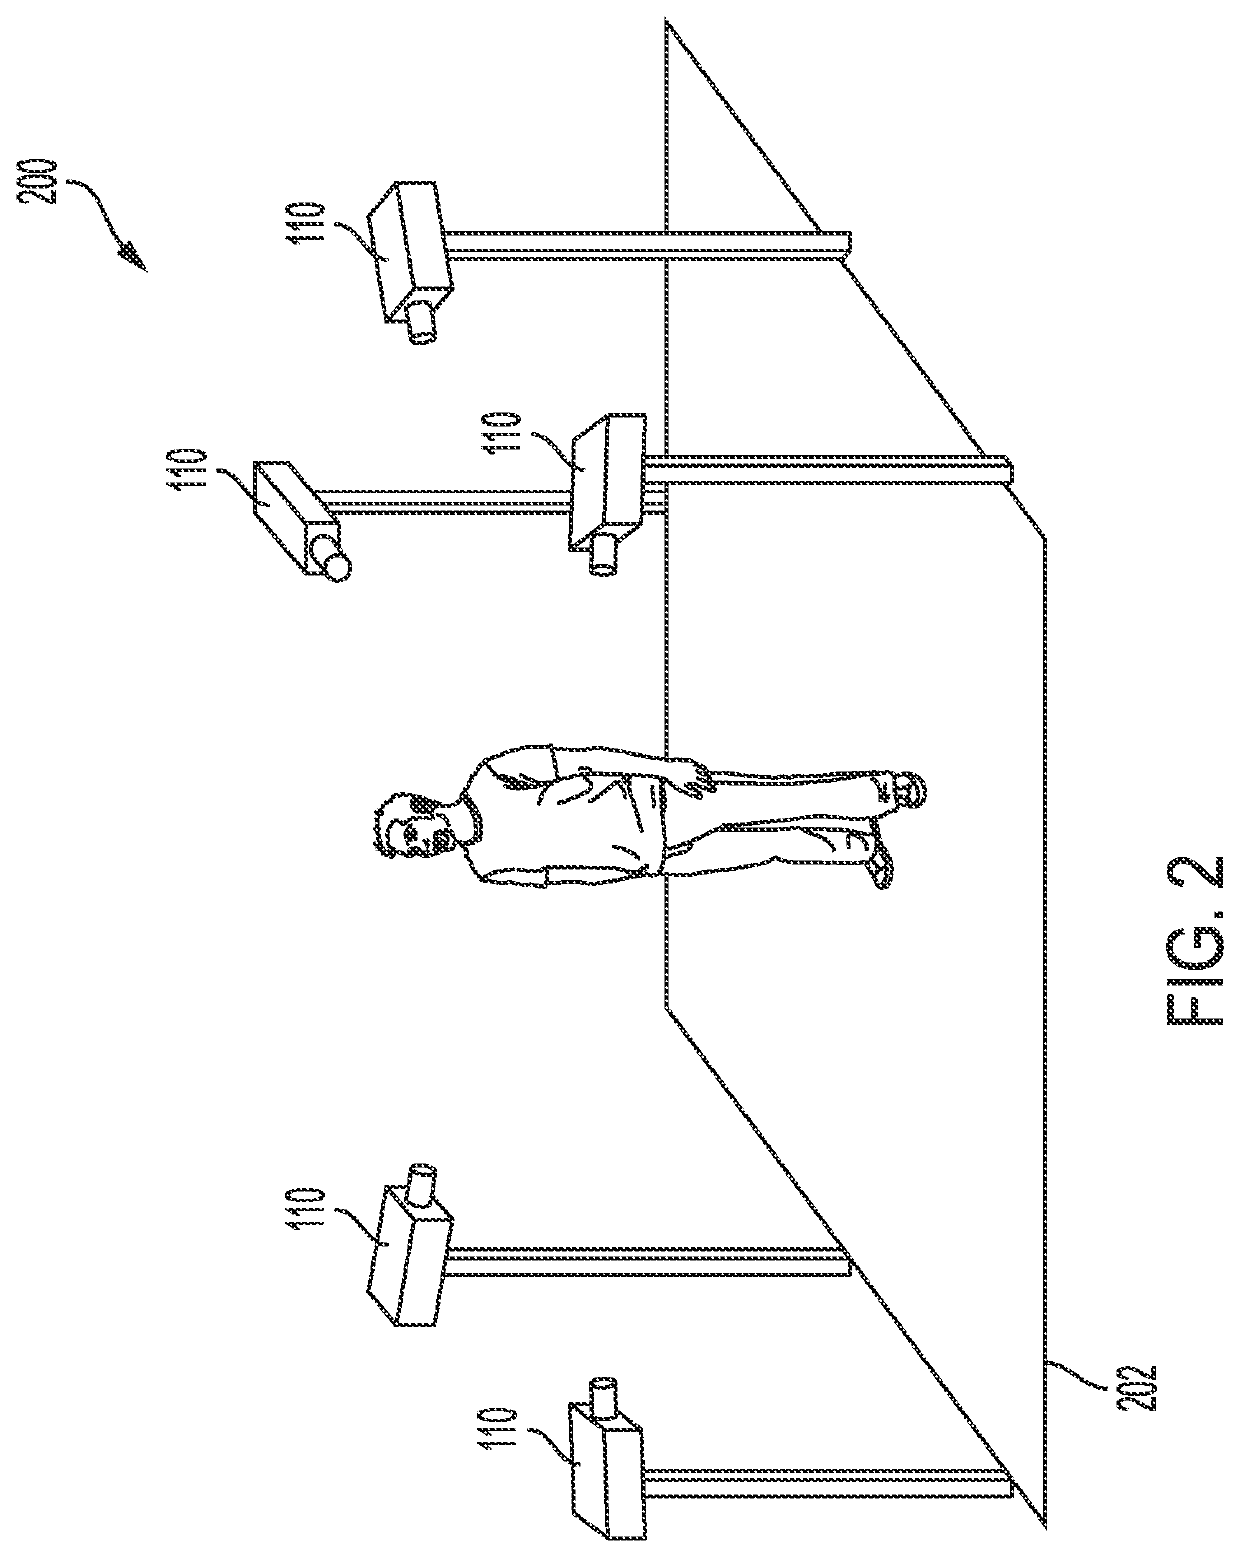 Systems and methods for machine vision based object recognition